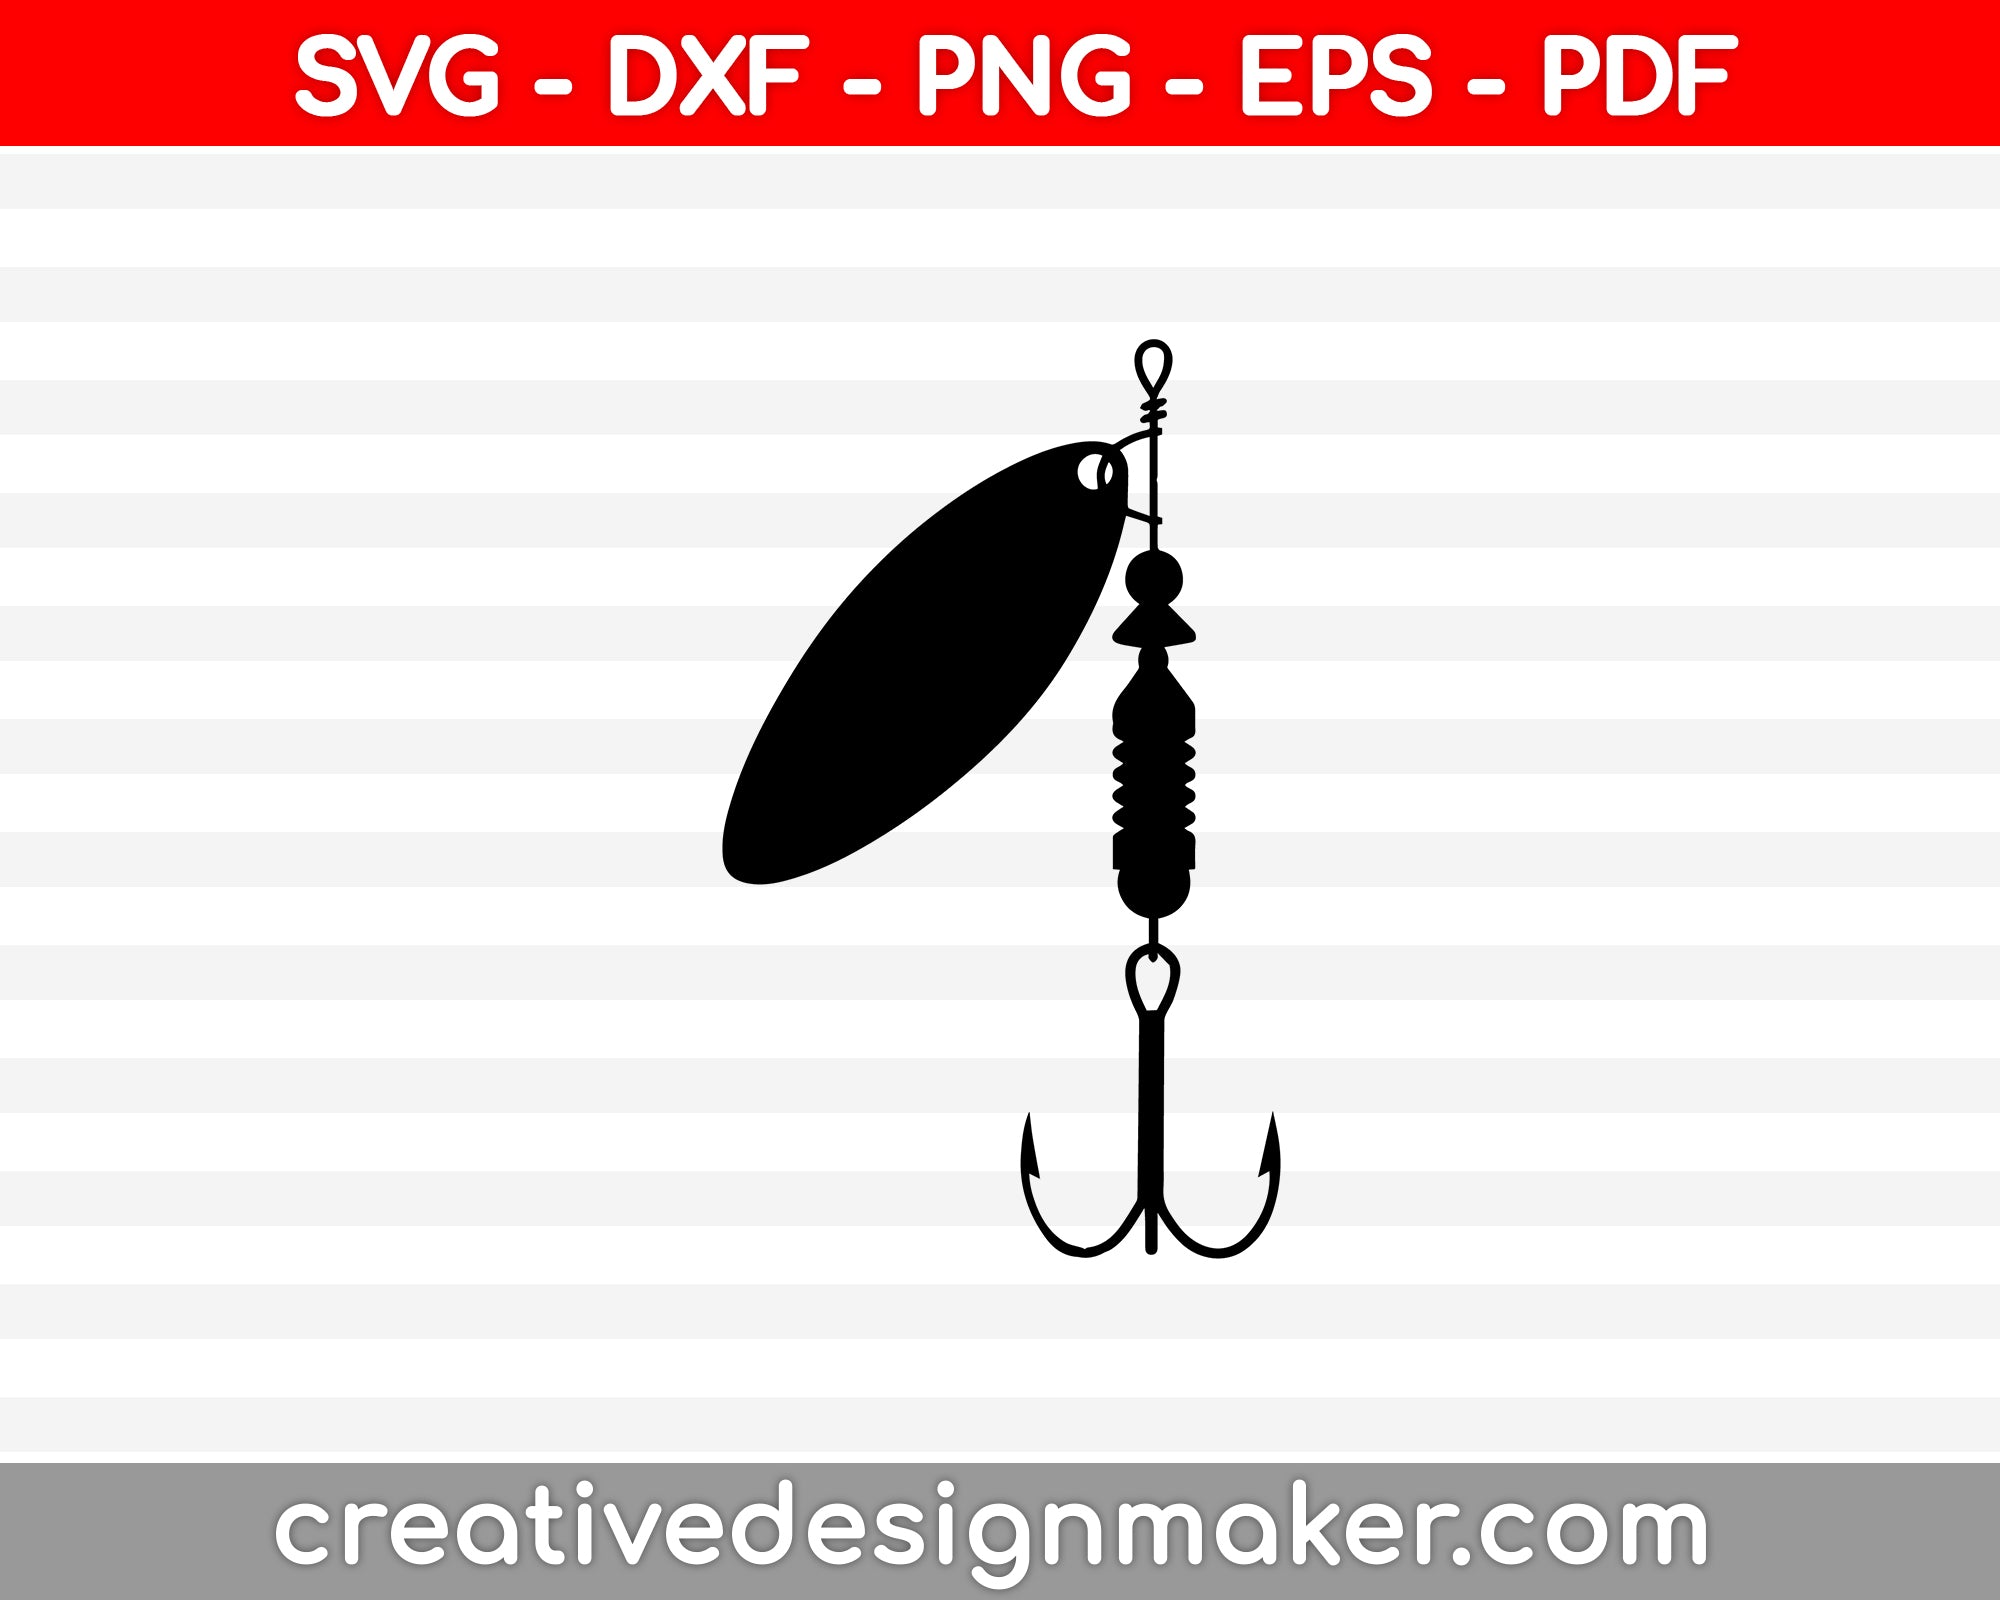 Fishing Hooks SVG and PNG Files Clipart, Fishing Hooks Print SVG